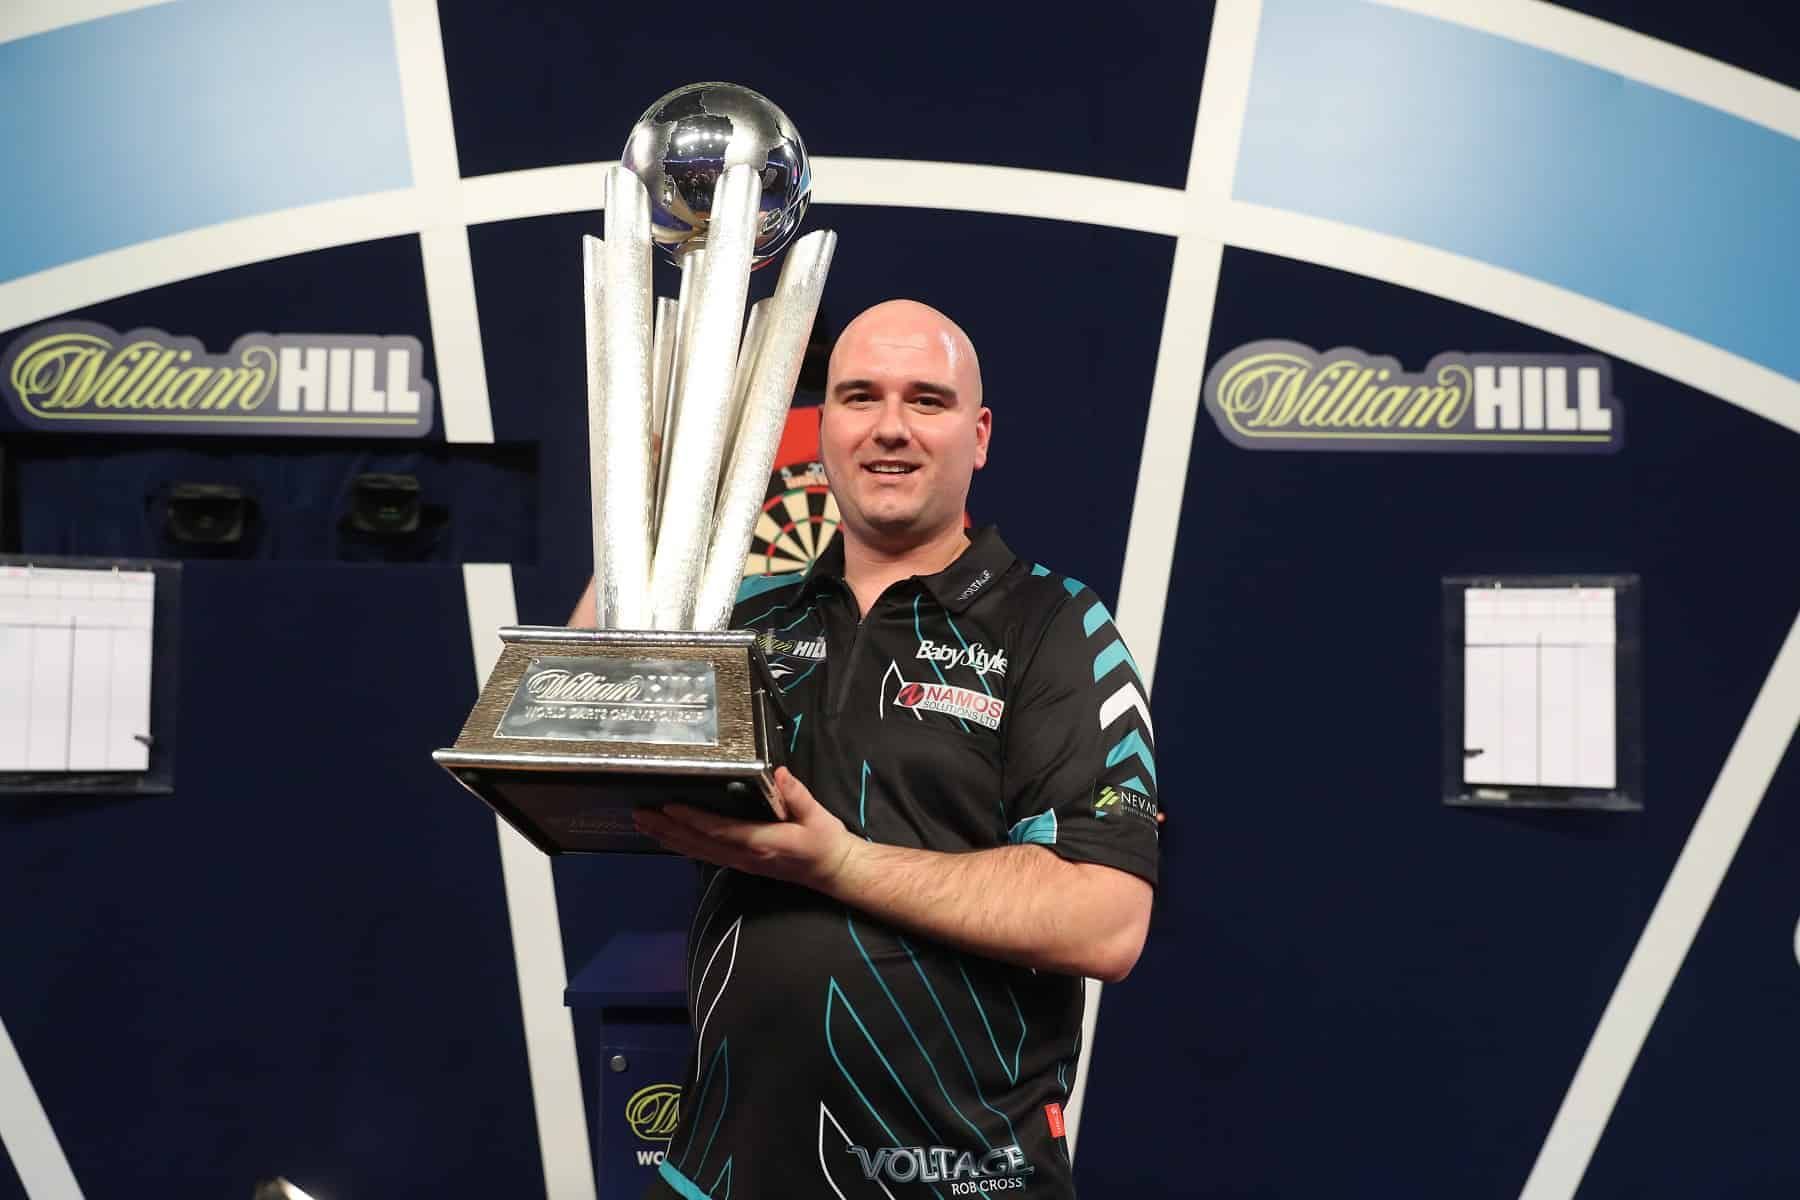 PDC World Darts Championship 2019 preview - Thursday December 13 session